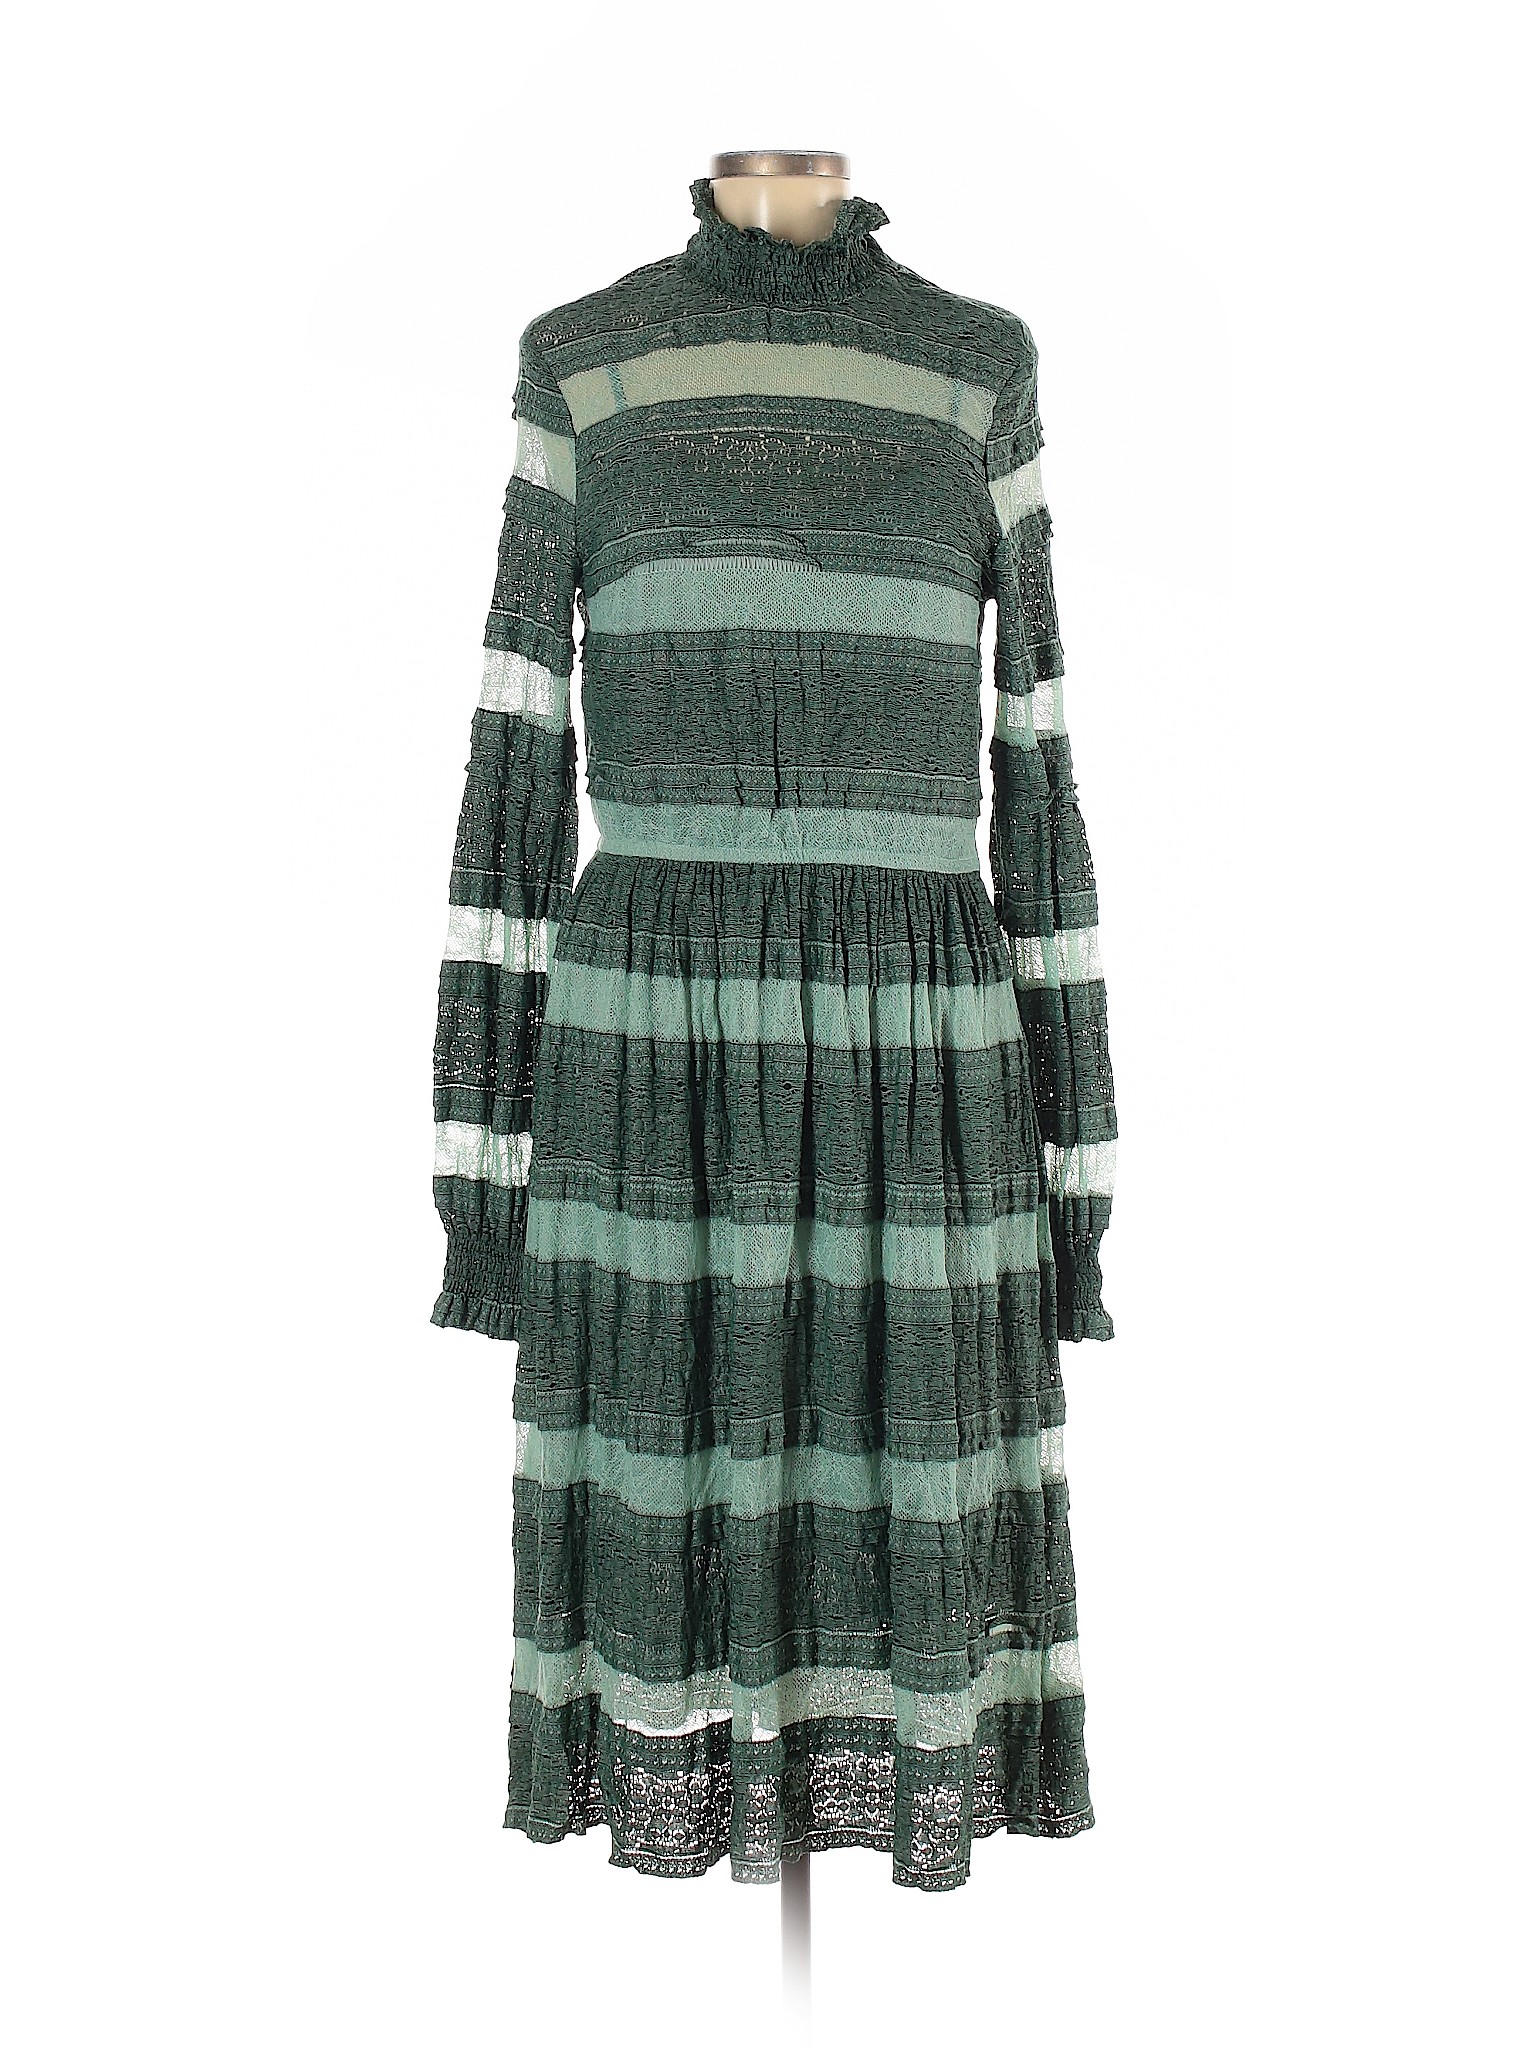 Lucy Paris Stripes Green Casual Dress Size M - 90% off | thredUP